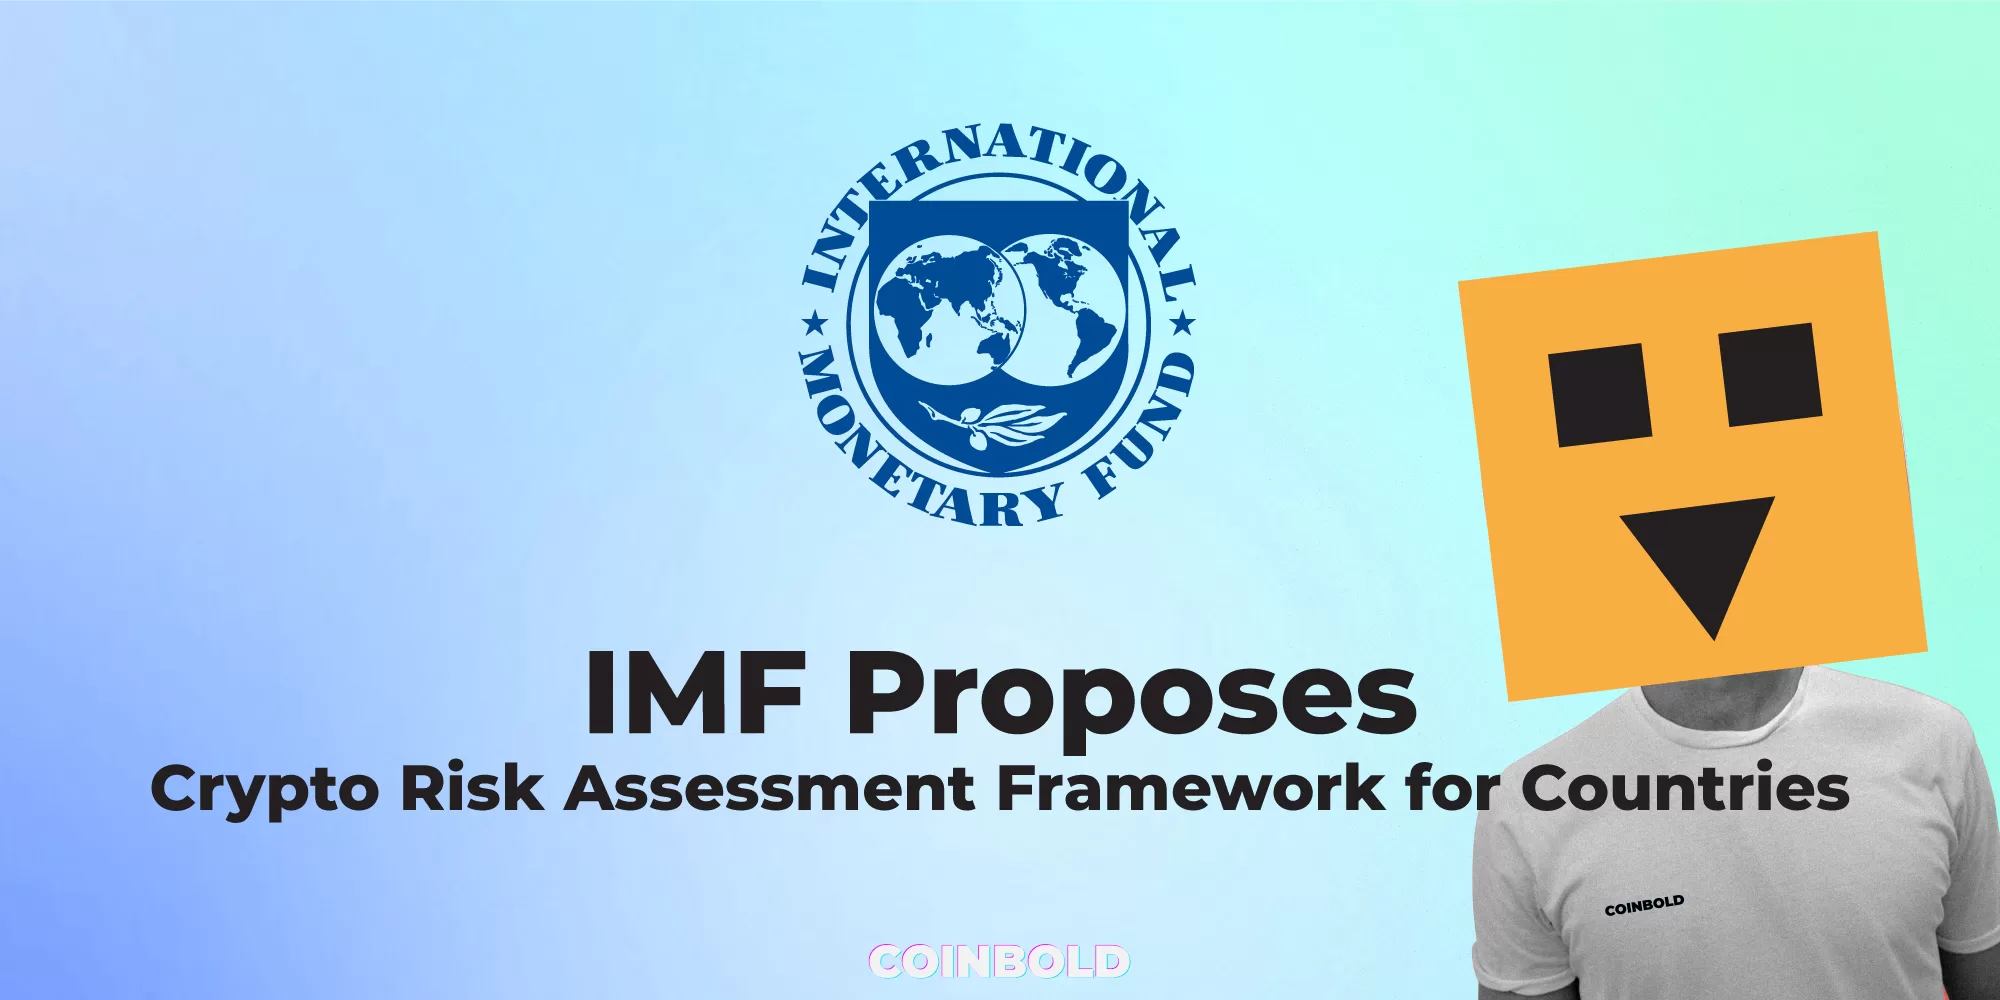 IMF Proposes Crypto Risk Assessment Framework for Countries